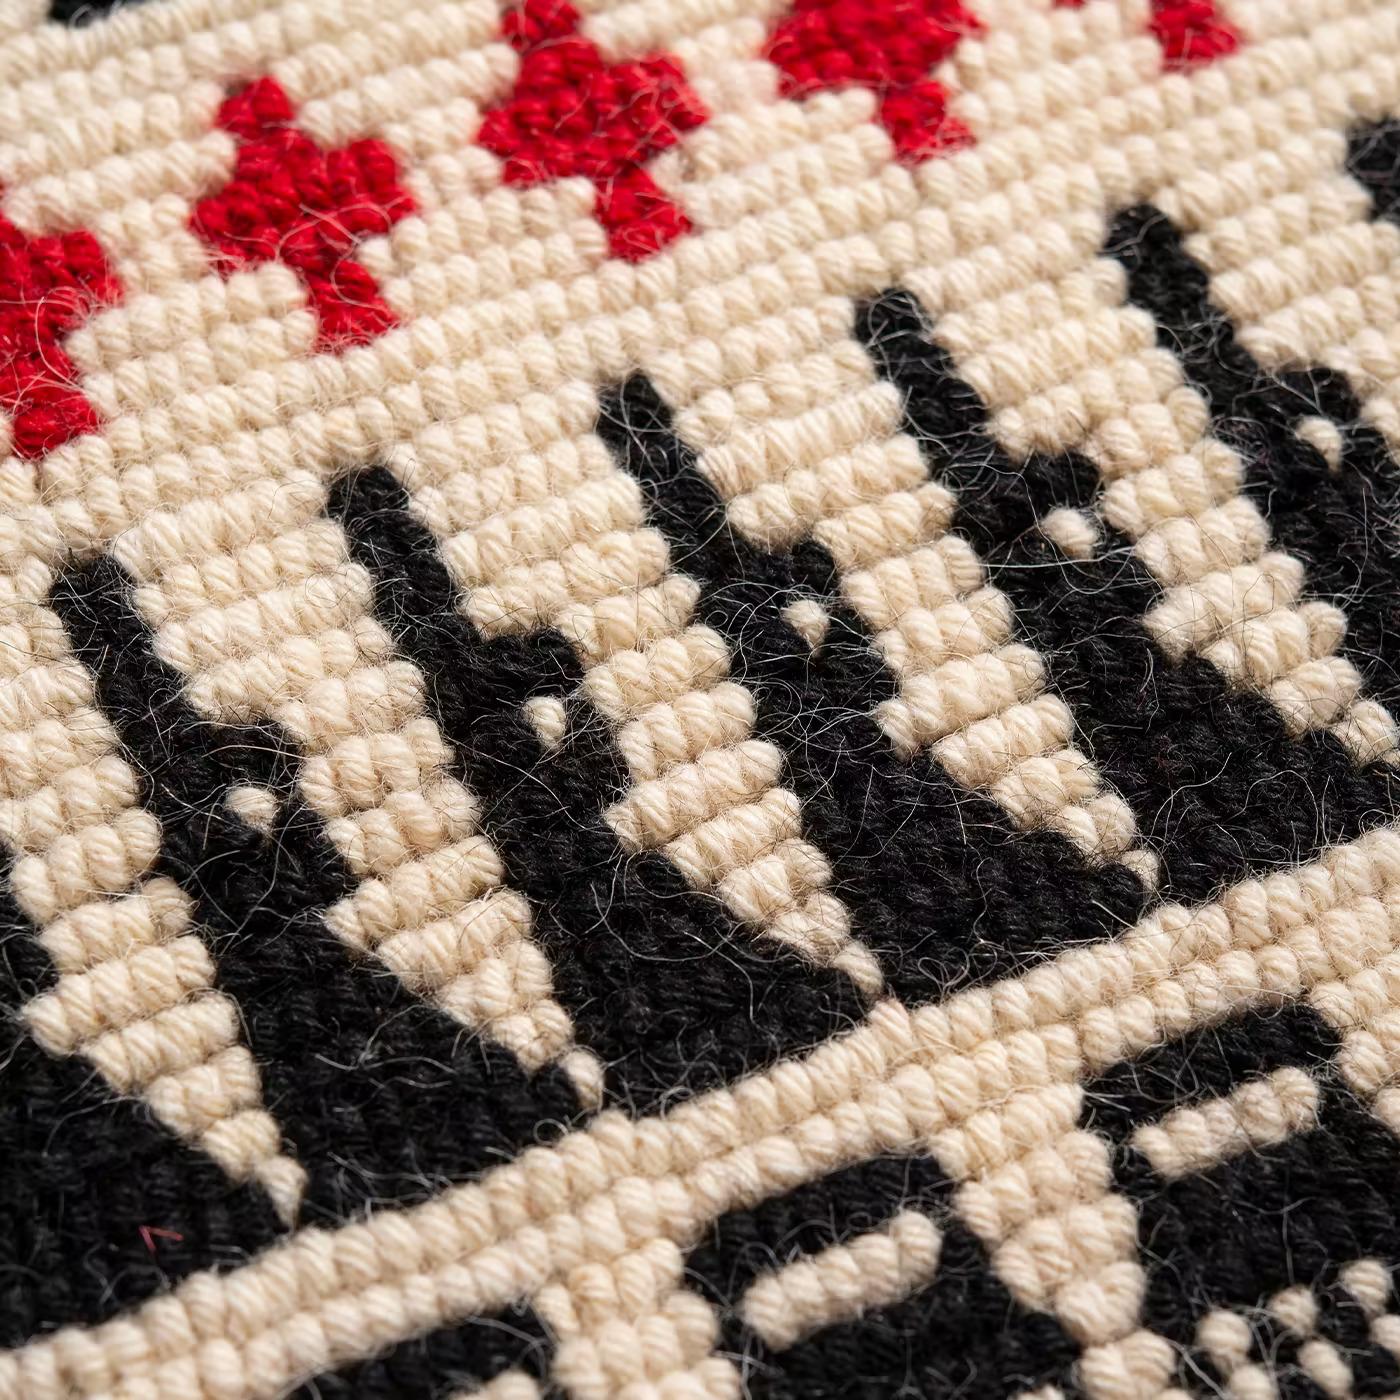 Each rug is a unique piece, hand-made in Sardinia using an ancient grain-weaving technique native to the island known as ‘a pibiones’, dialectal word for 